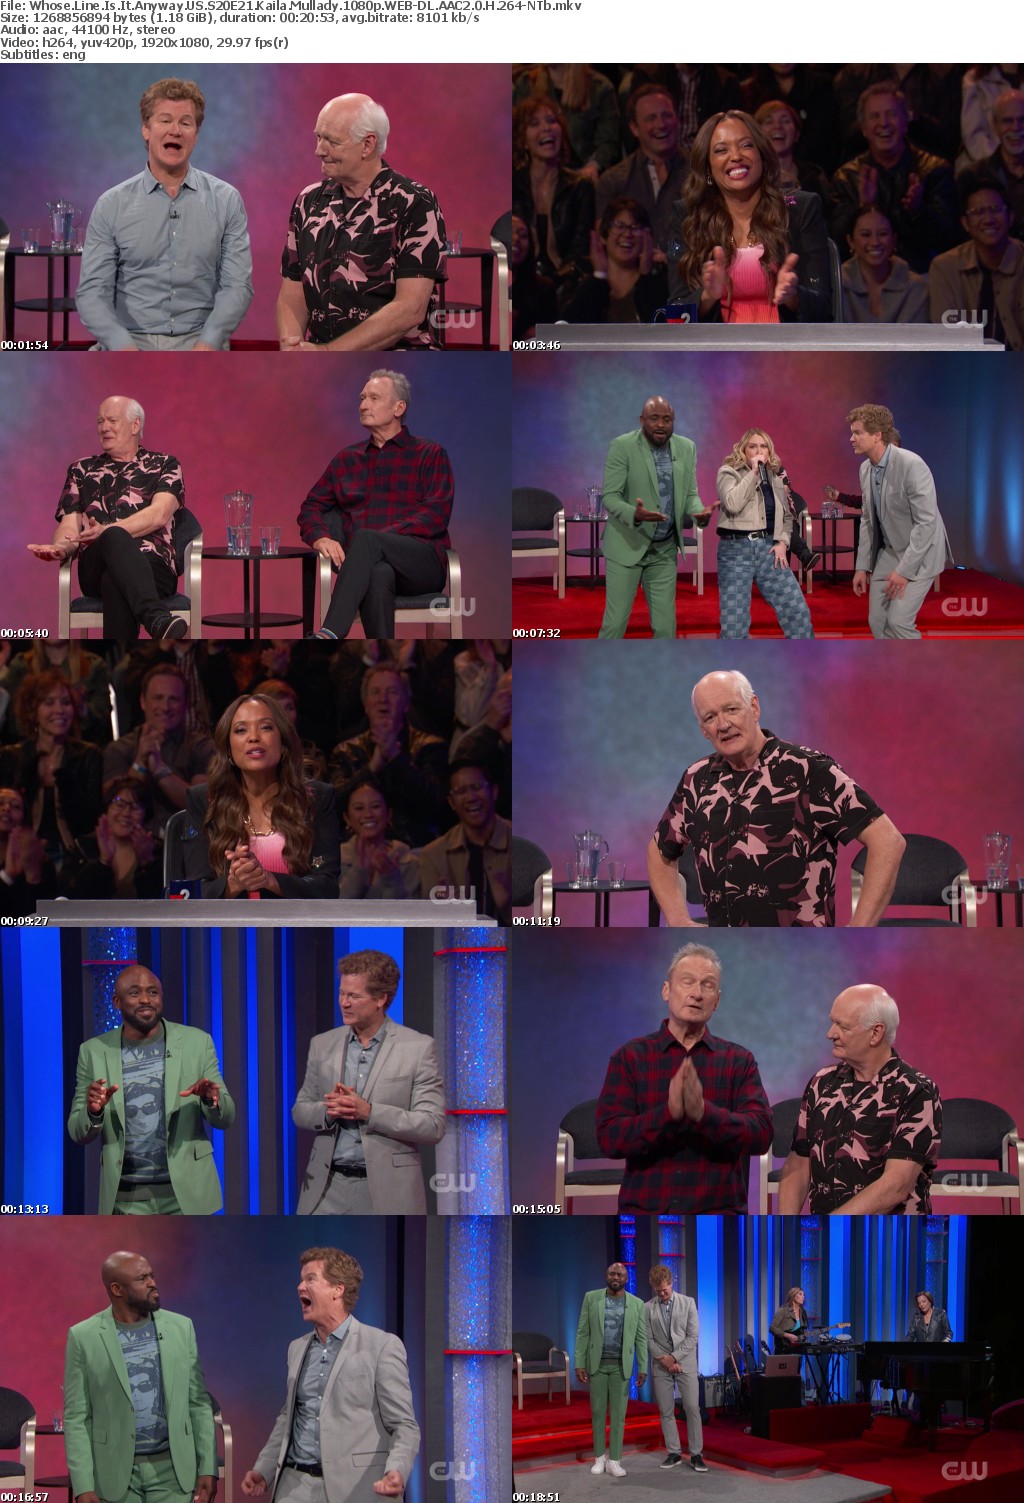 Whose Line Is It Anyway US S20E21 Kaila Mullady 1080p WEB-DL AAC2 0 H 264-NTb